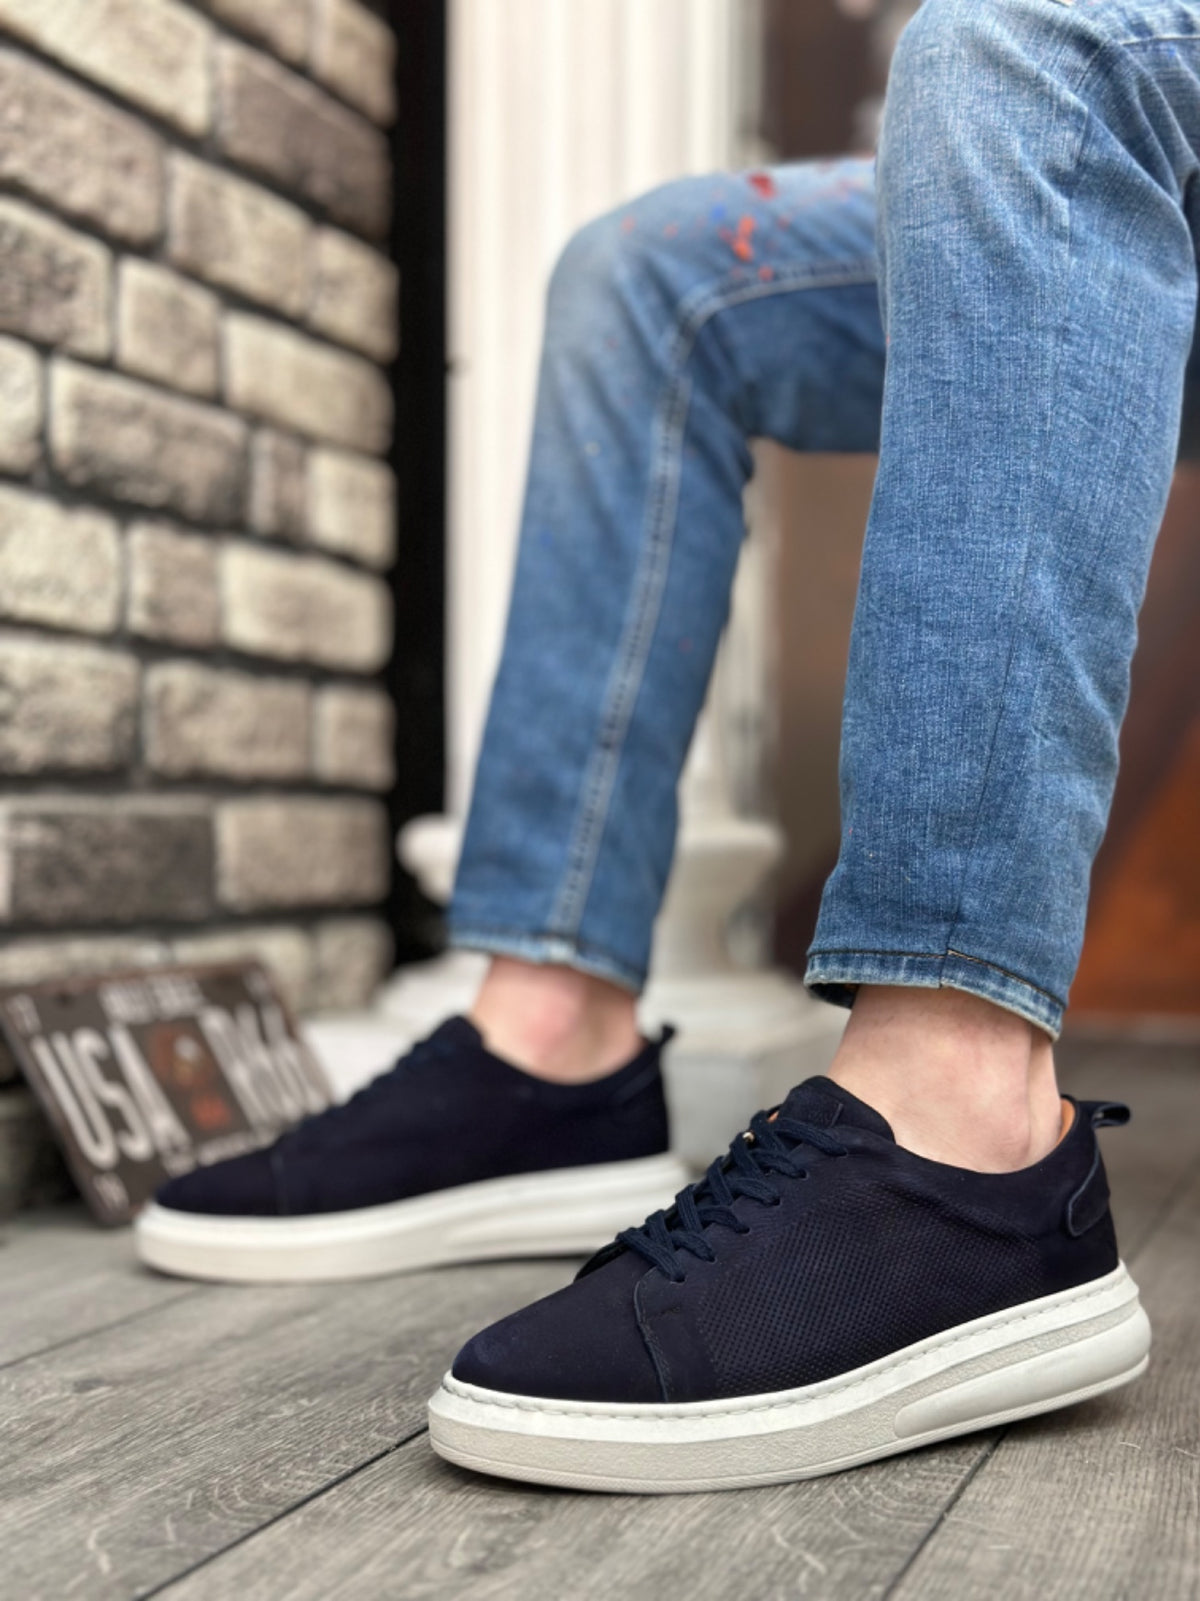 BA0336 Inside and Outside Genuine Nubuck Leather Navy Blue Lace-up Casual Men's Shoes - STREETMODE™